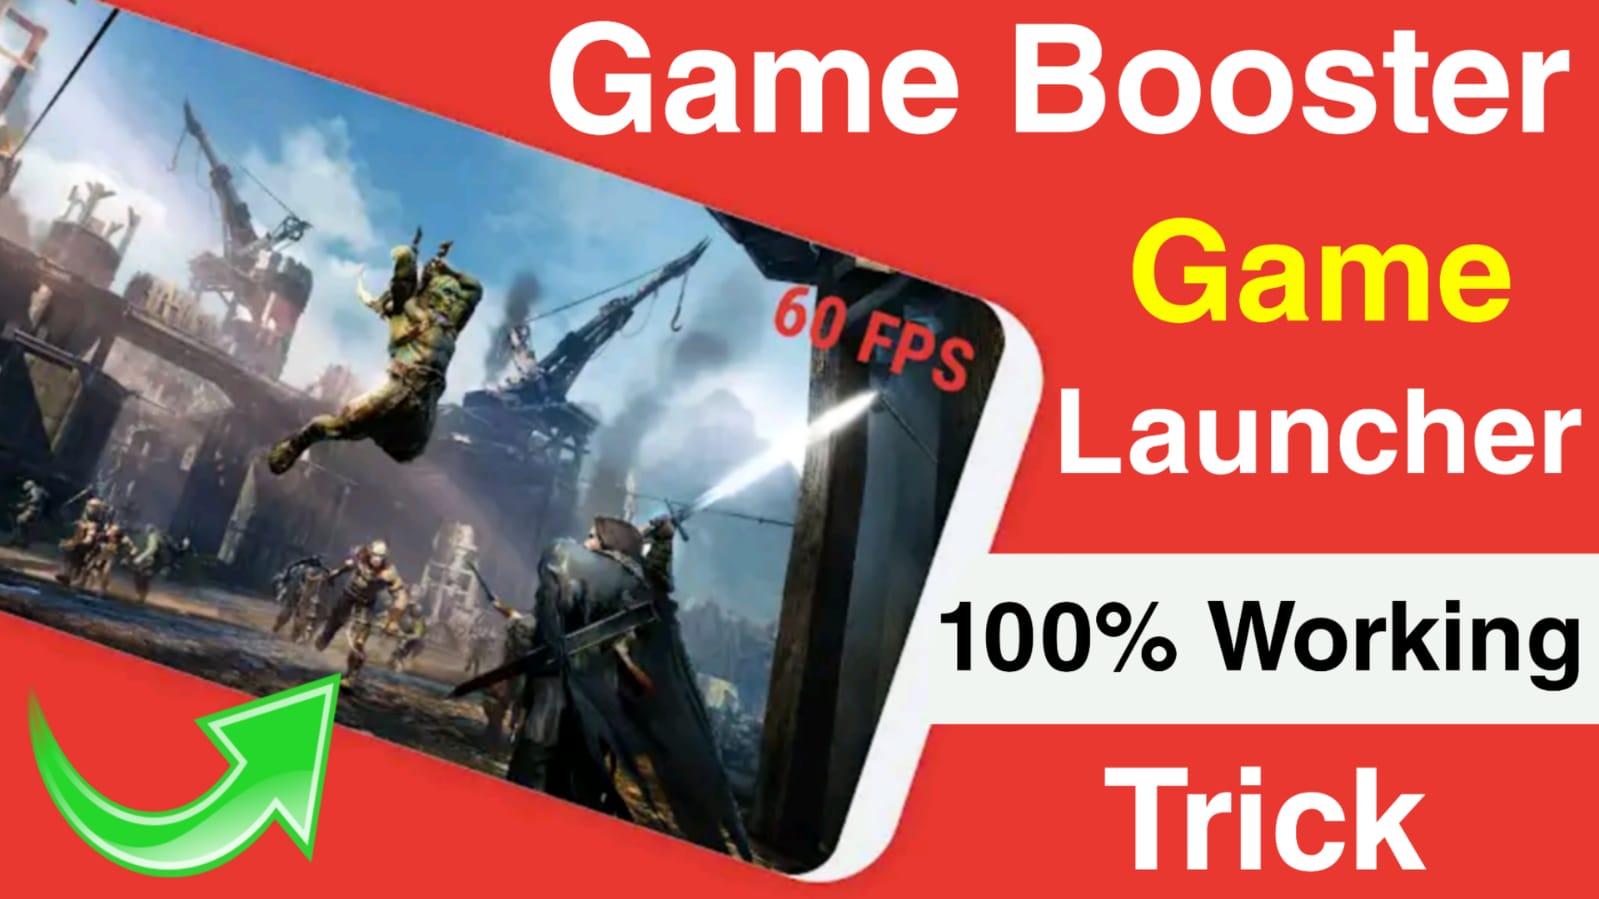 Game Booster game Launcher